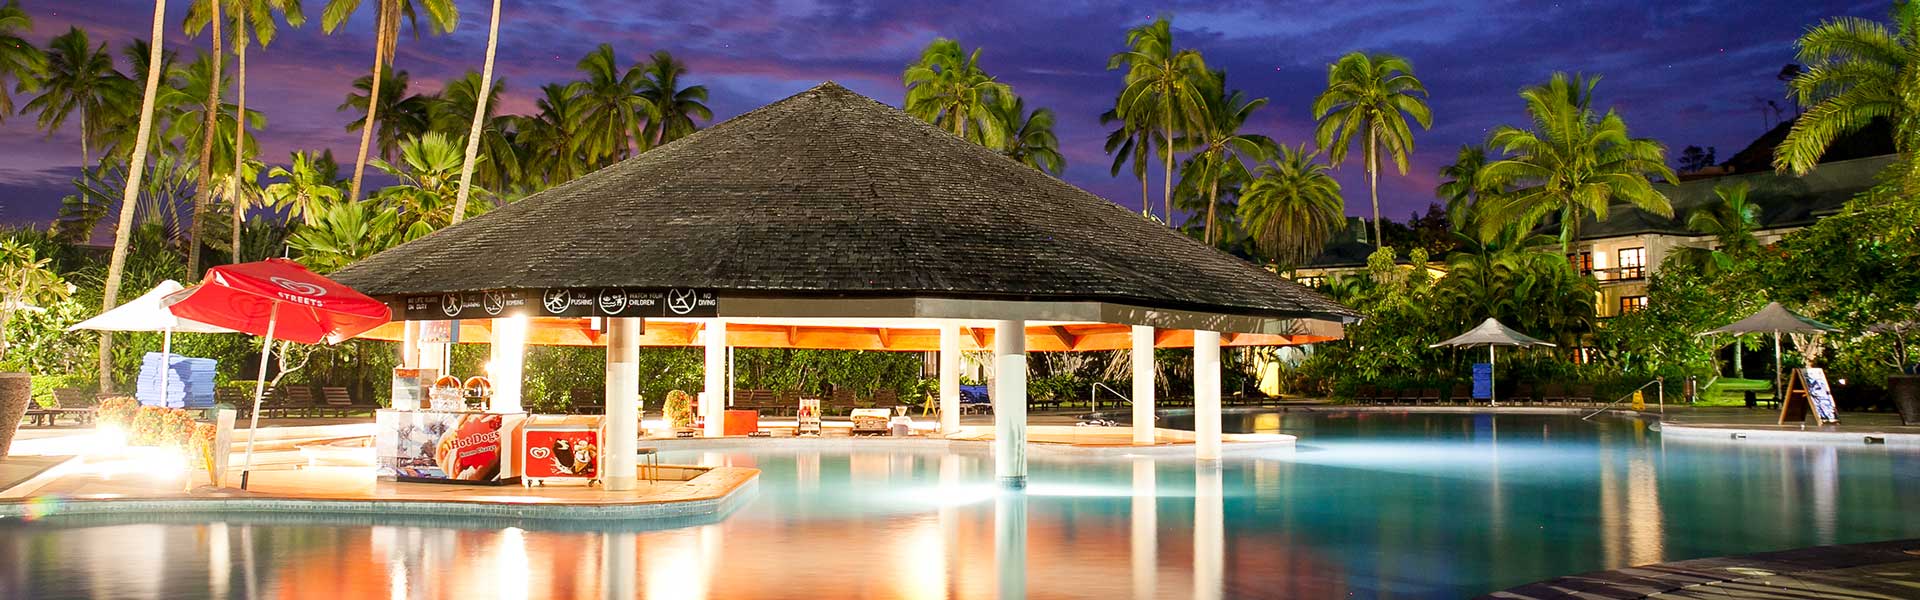 Christmas in Fiji: 7 Nights’ All-Inclusive Family Getaway @$1,750 PP!